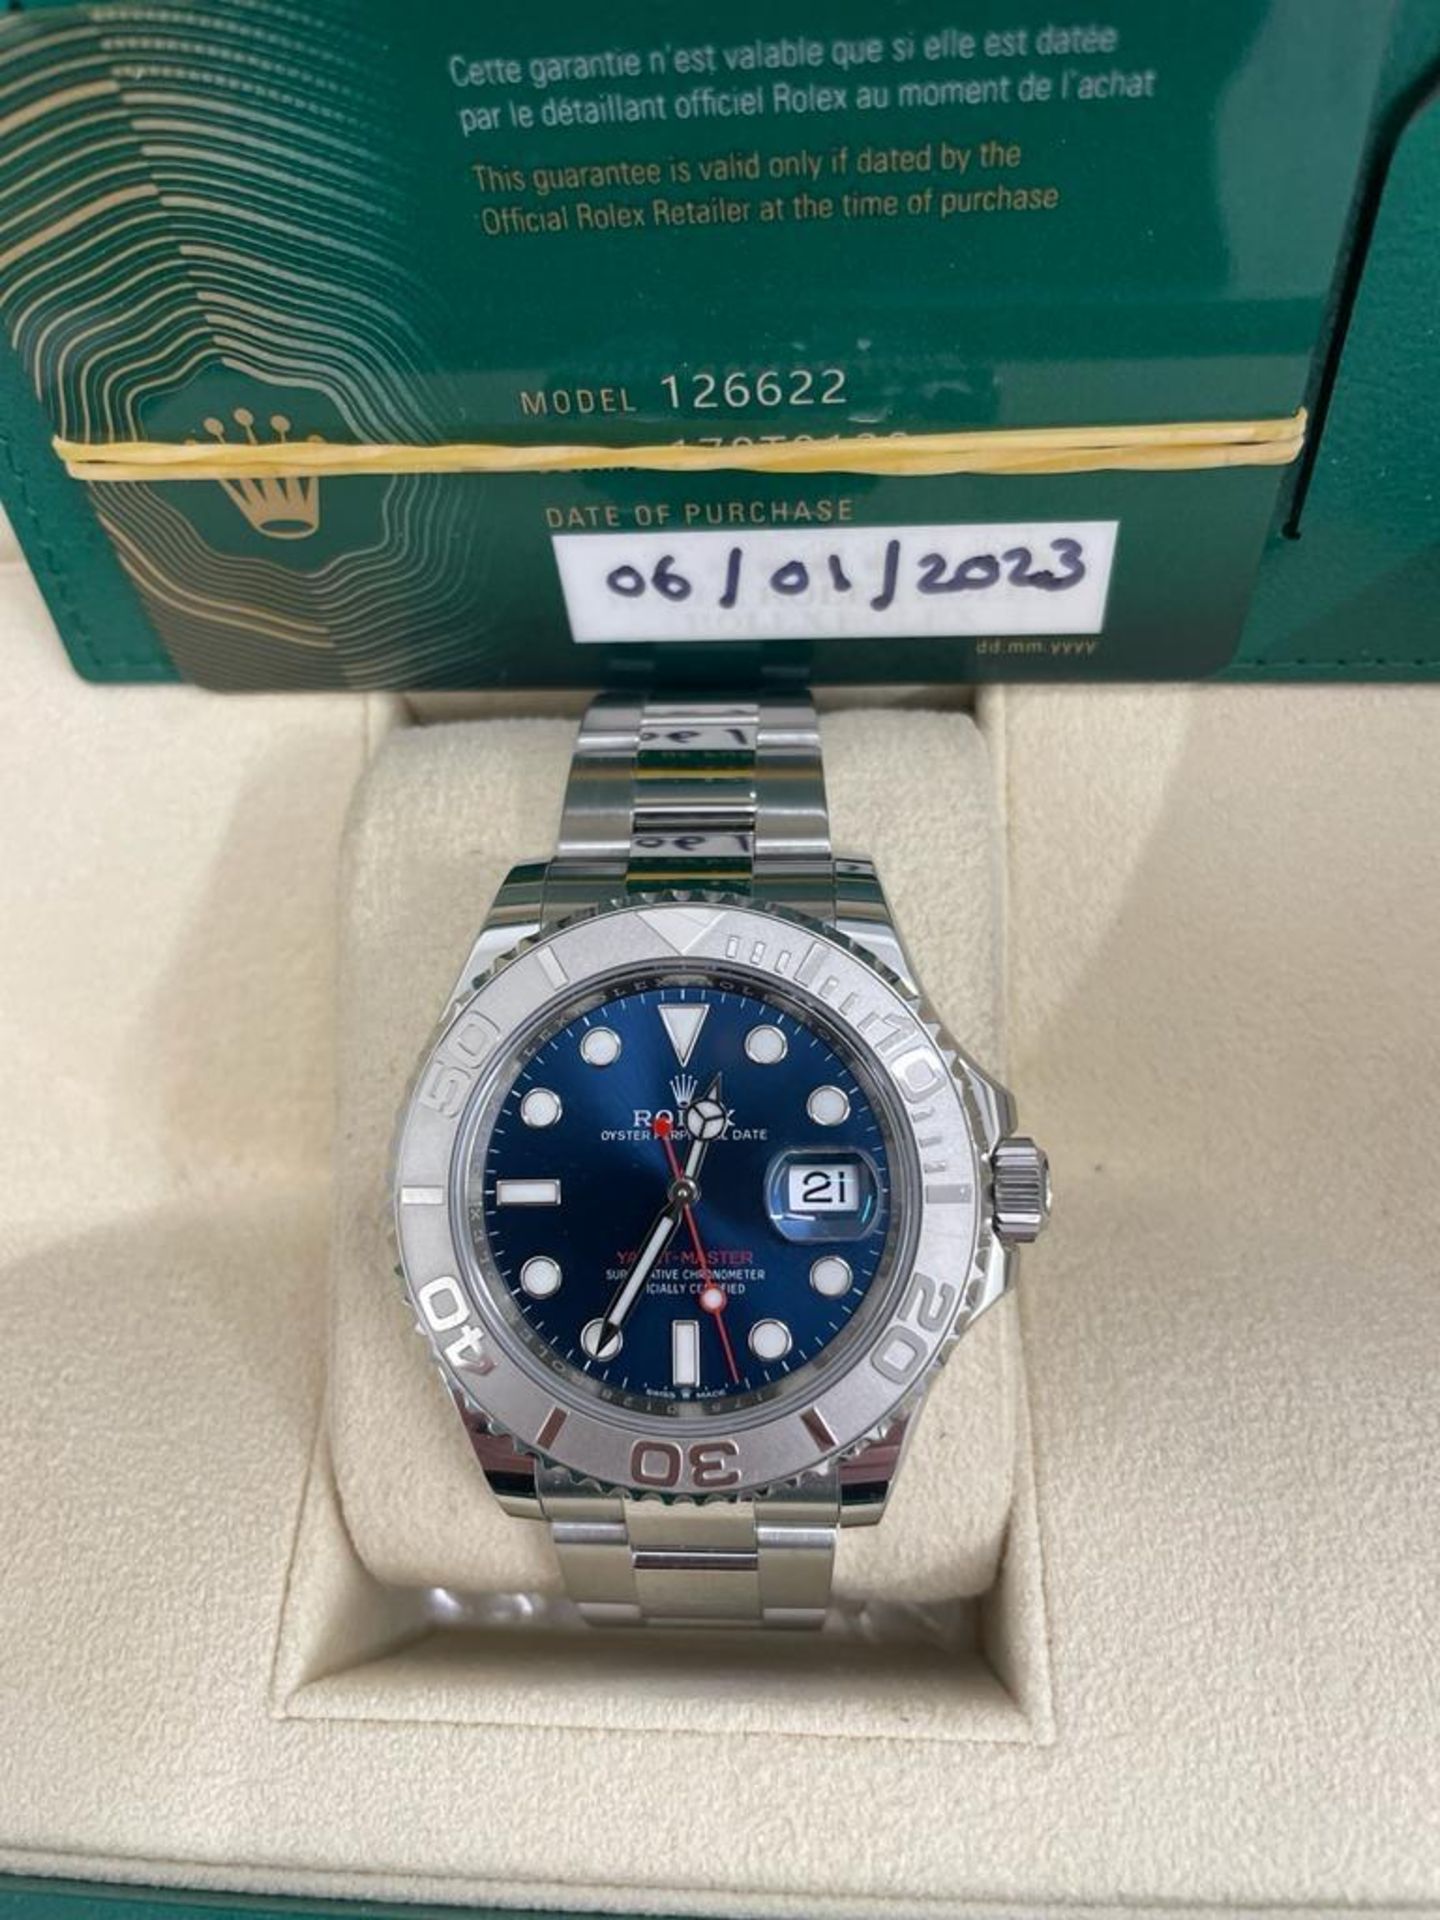 A ROLEX YACHTMASTER GENTLEMAN'S WRISTWATCH, STAINLESS STEEL CASE AND STRAP, SOUGHT AFTER BLUE - Image 5 of 5